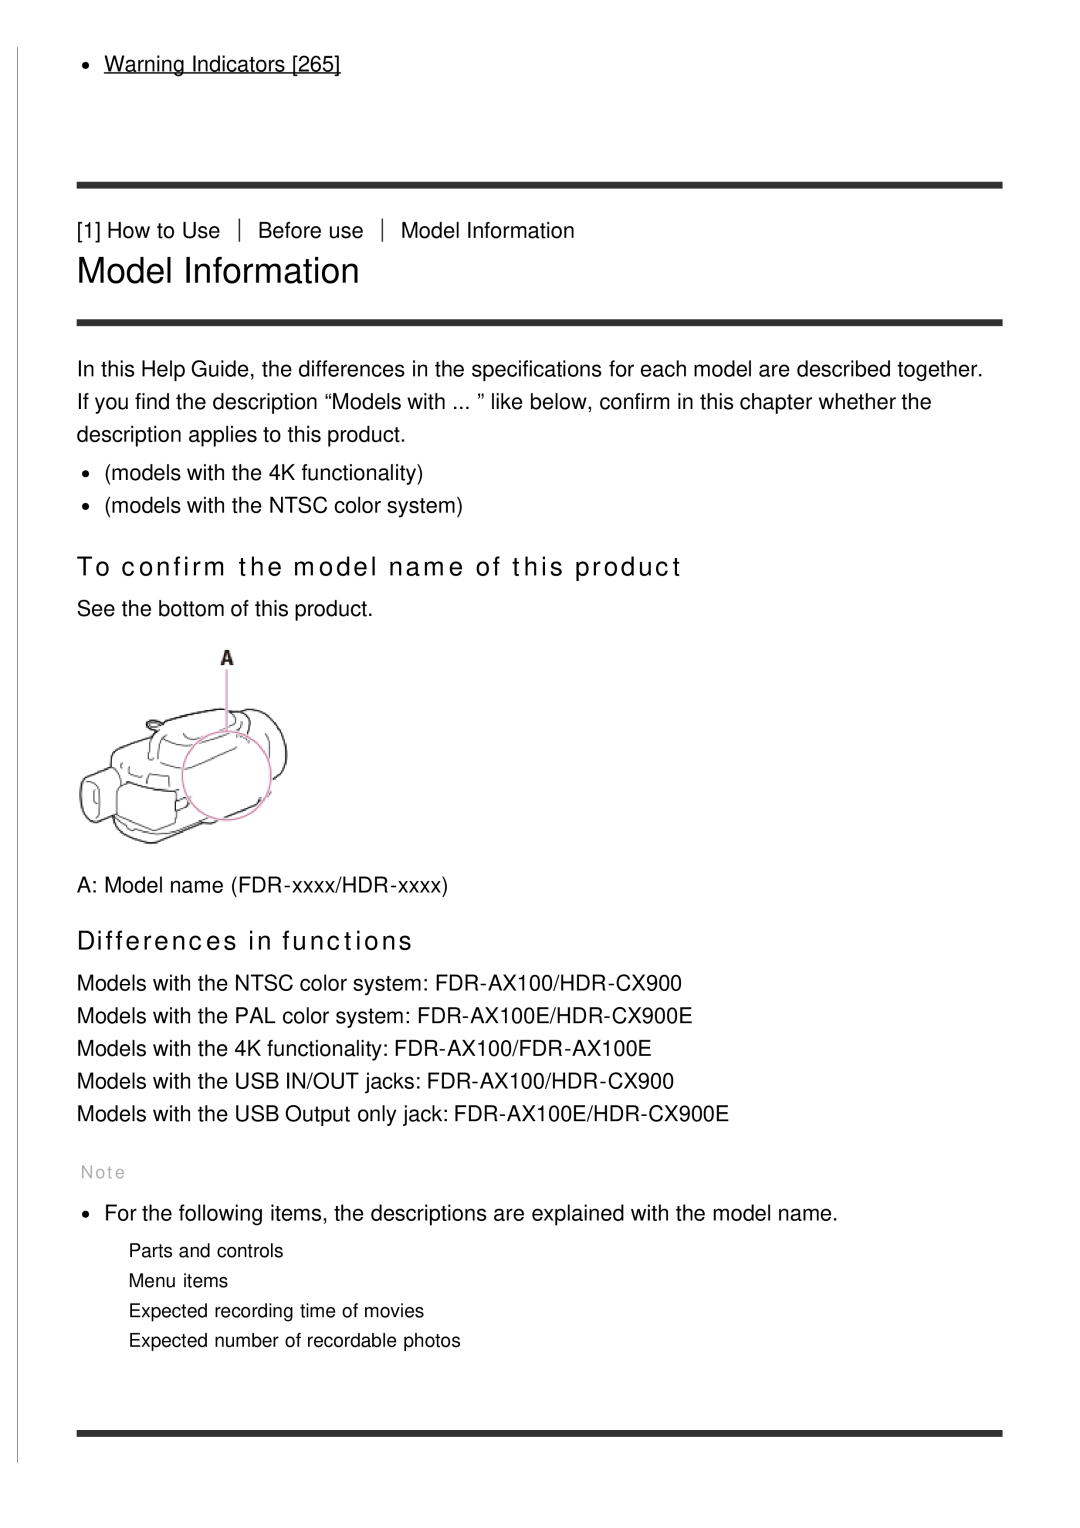 Sony FDR-AX100E, HDR-CX900 manual Model Information, To confirm the model name of this product, Differences in functions 